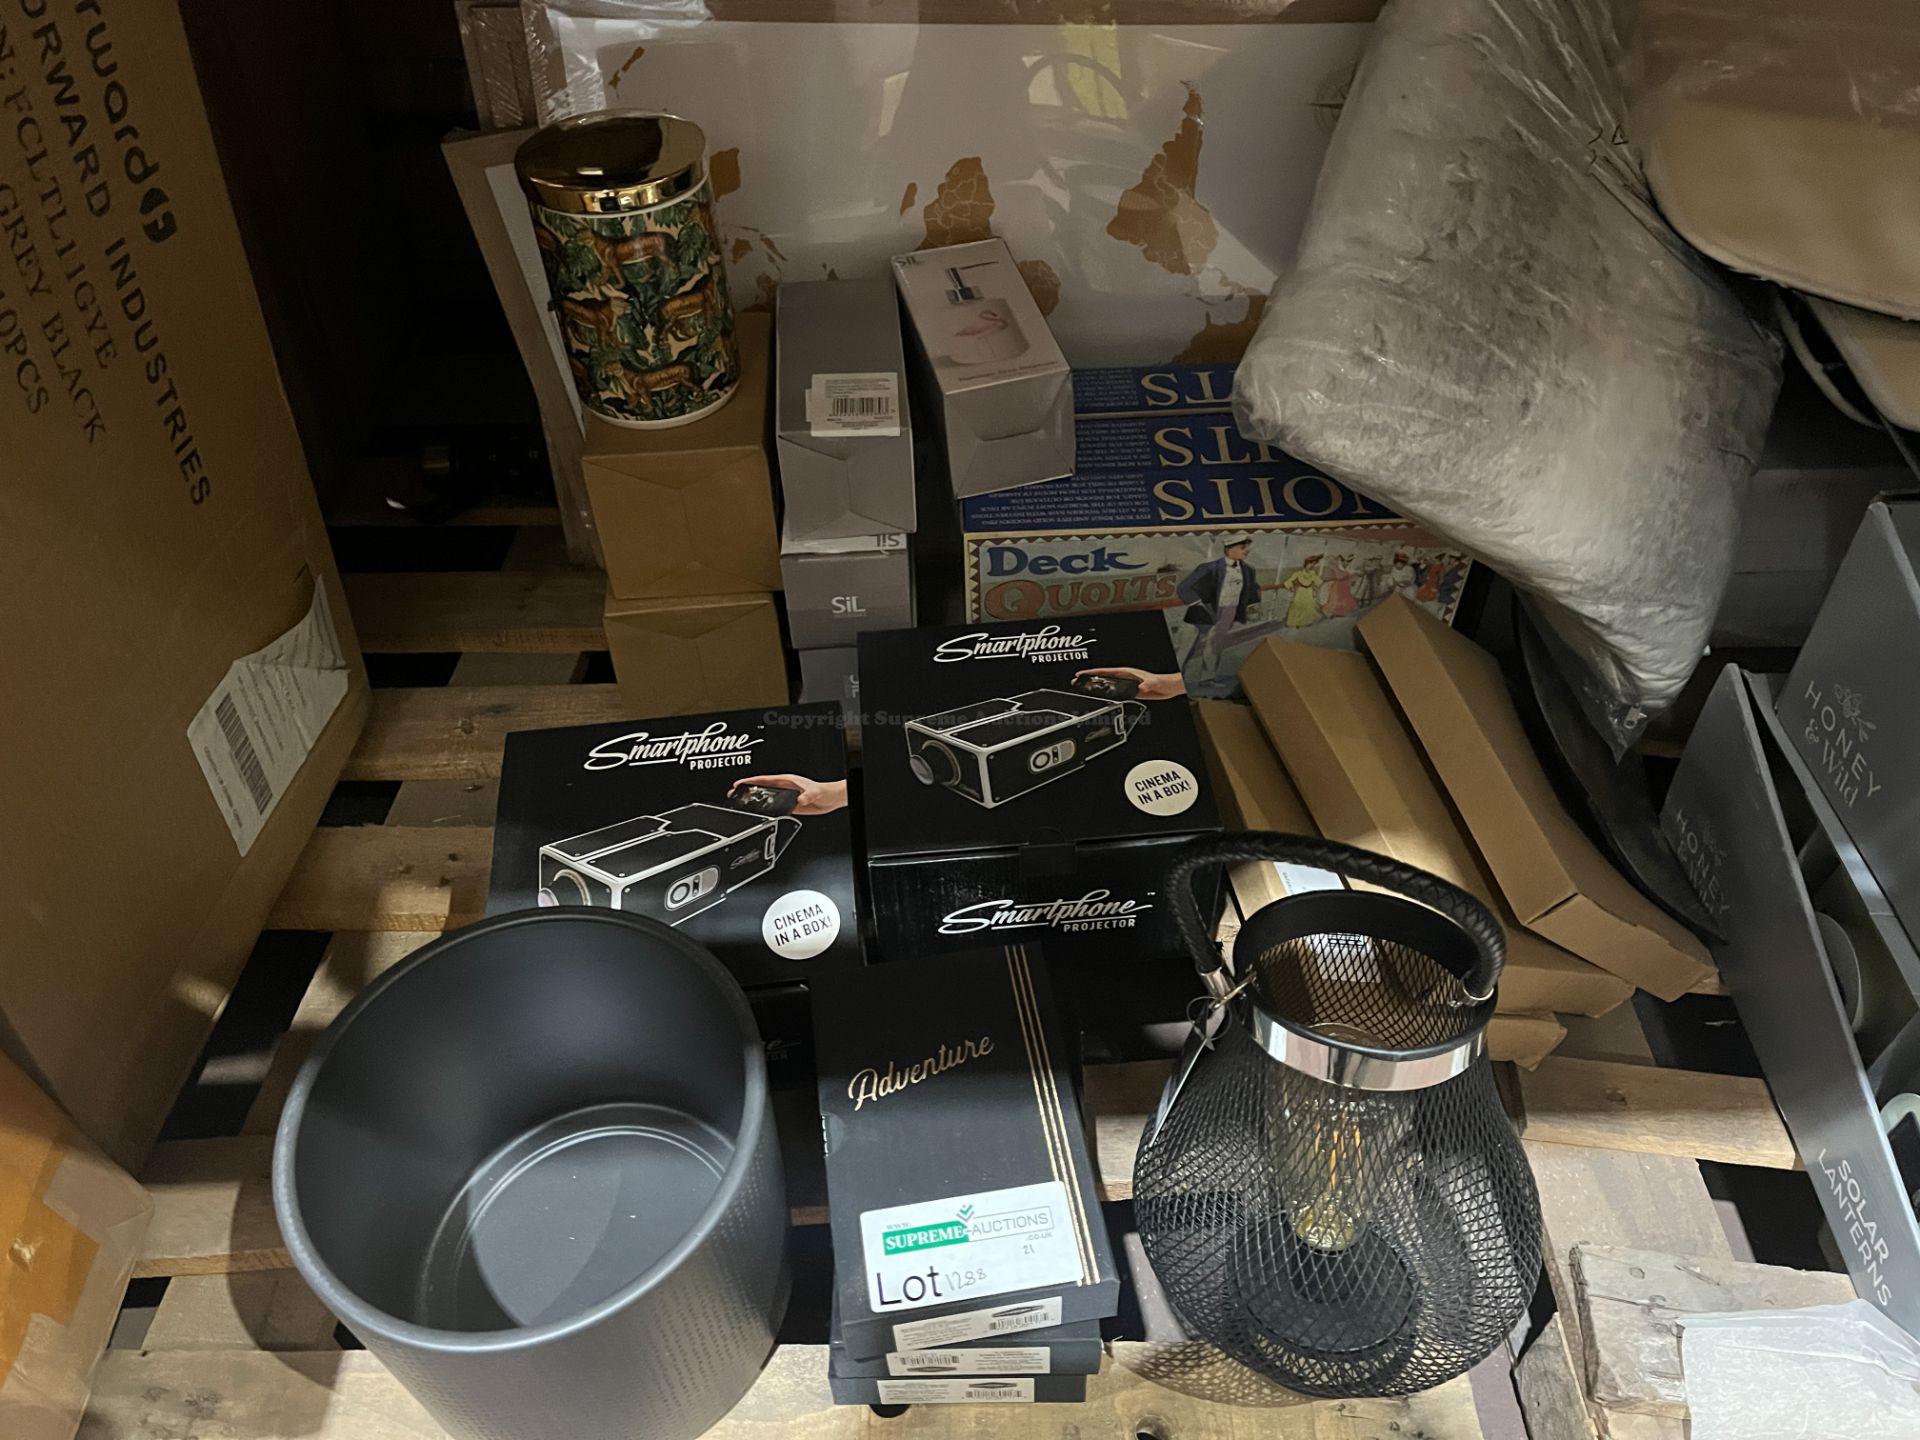 MIXED LOT INCLUDING LANTERNS, SMARTPHONE PROJECTORS, GAMES, CONTAINERS ETC R10-7